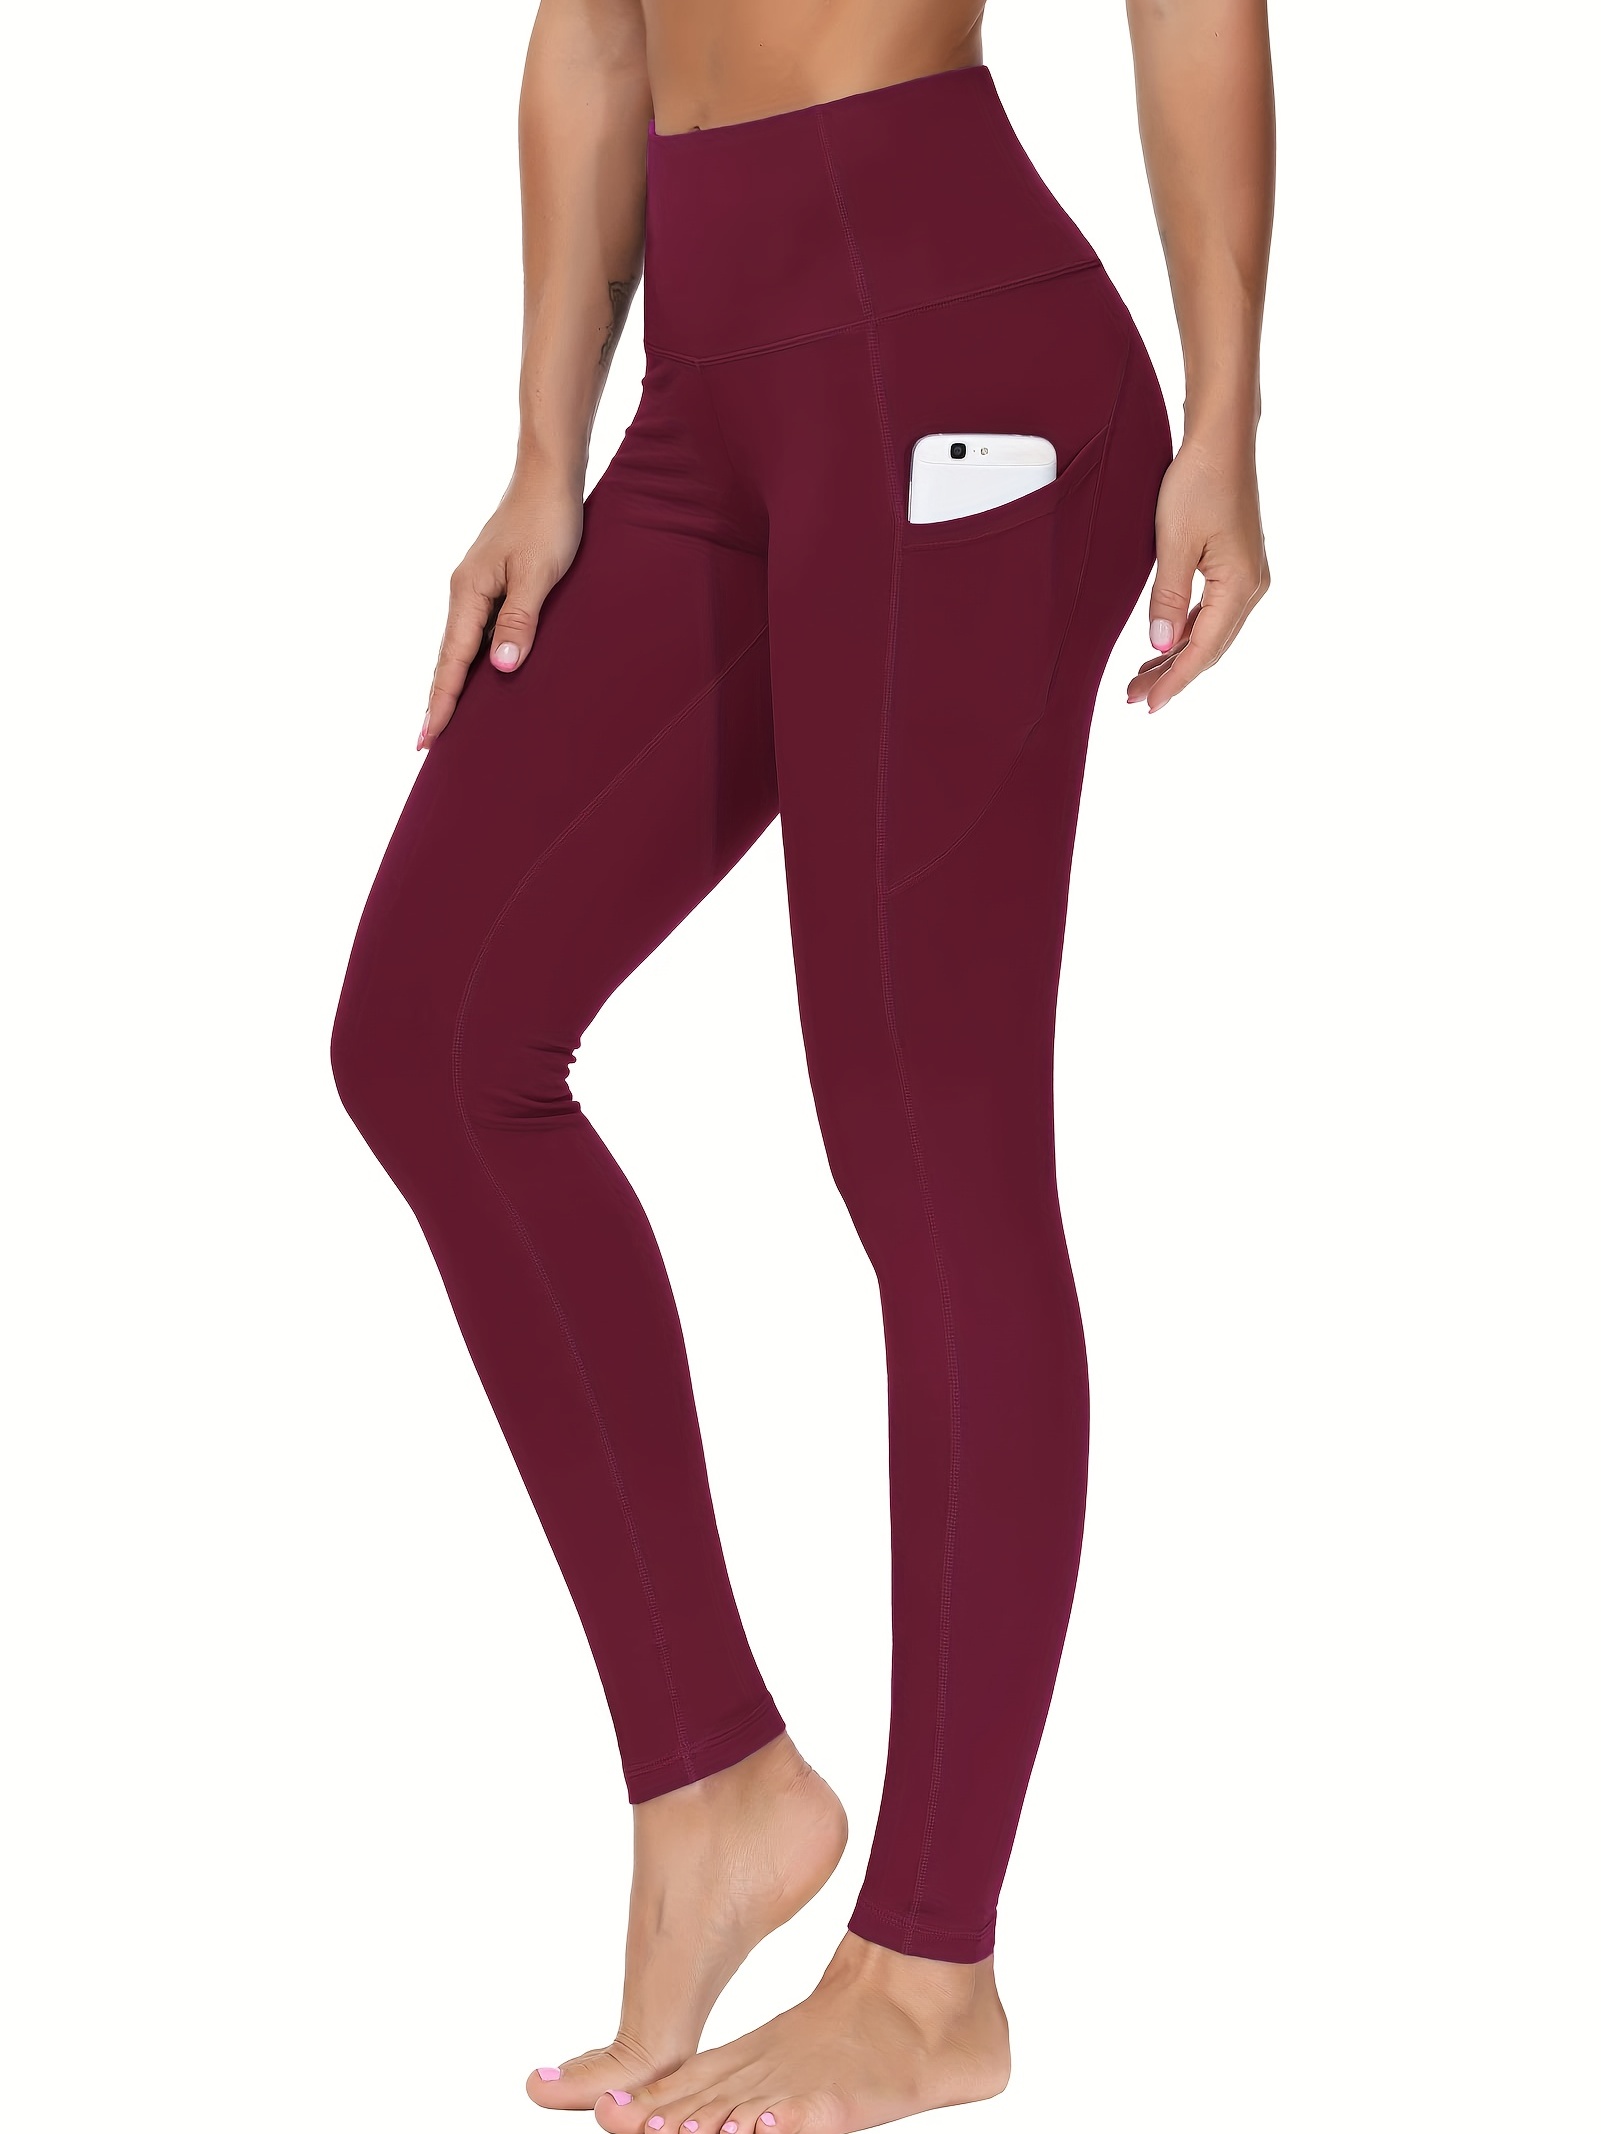 TUNGLUNG High Waist Yoga Pants, Yoga Pants with Pockets Tummy Control  Workout Pants 4 Way Stretch Pocket Leggings Wine Red at  Women's  Clothing store